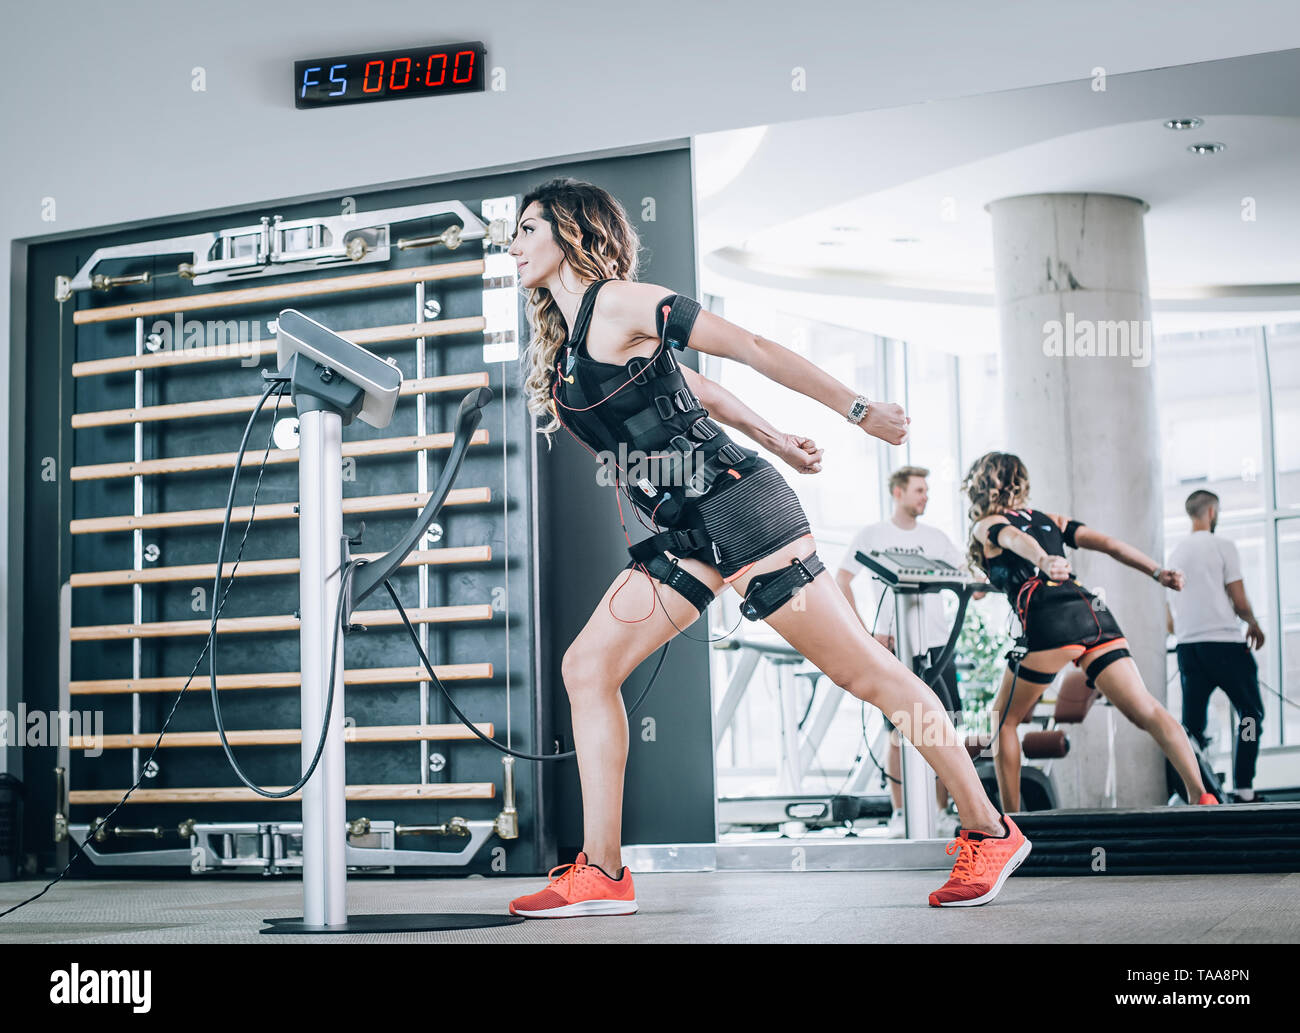 EMS electro stimulation women exercises with coach in modern gym. Electric muscle stimulation workout Stock Photo